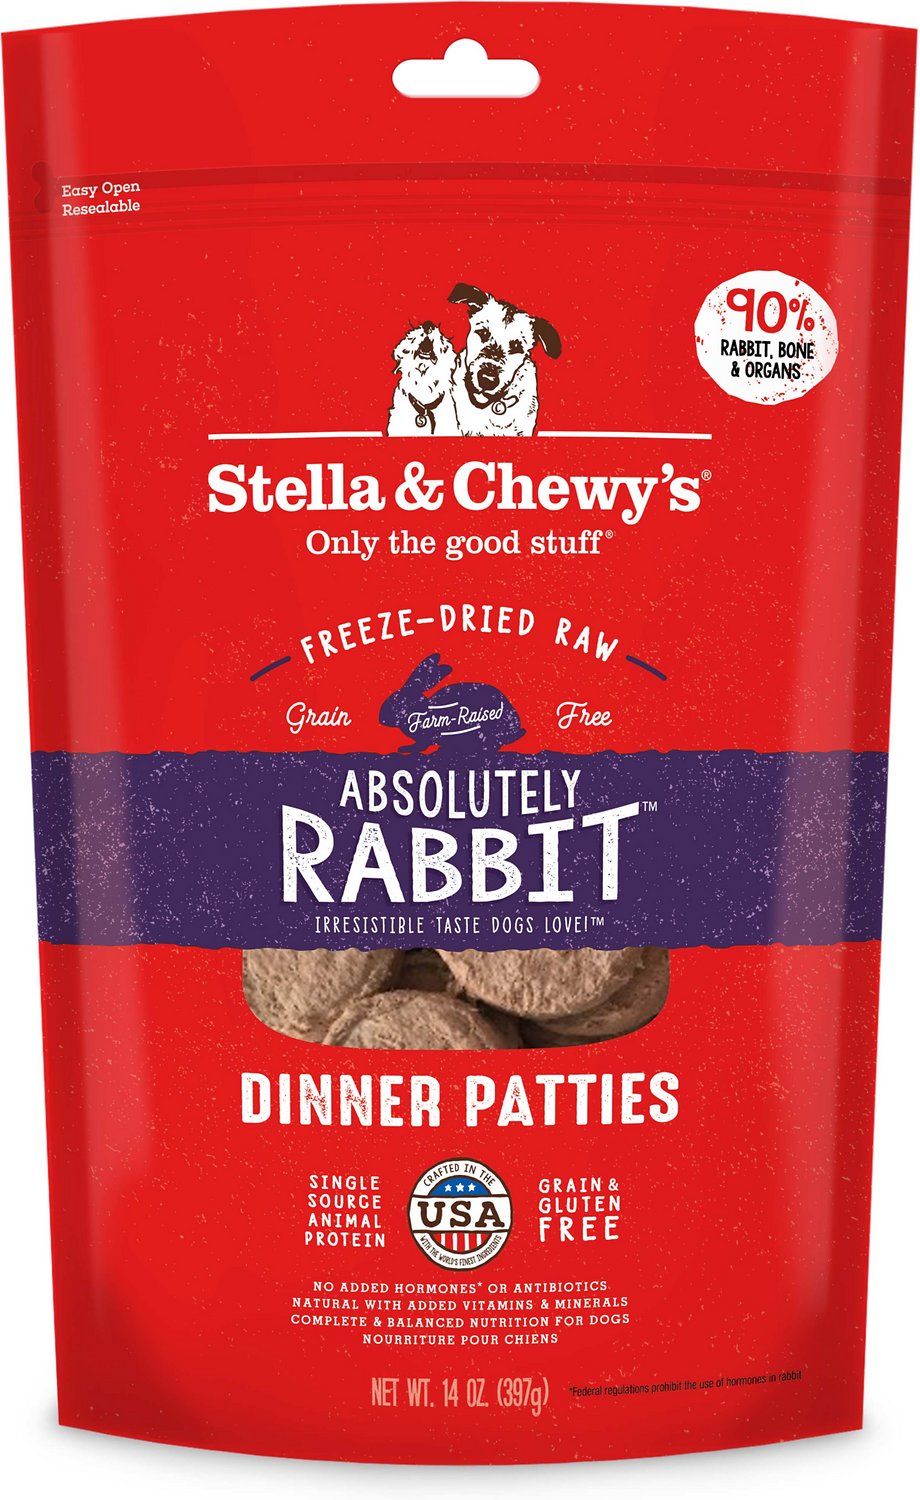 Stella & Chewy's - Absolutely Rabbit Dinner Patties Freeze-Dried Raw Dog Food - ARMOR THE POOCH